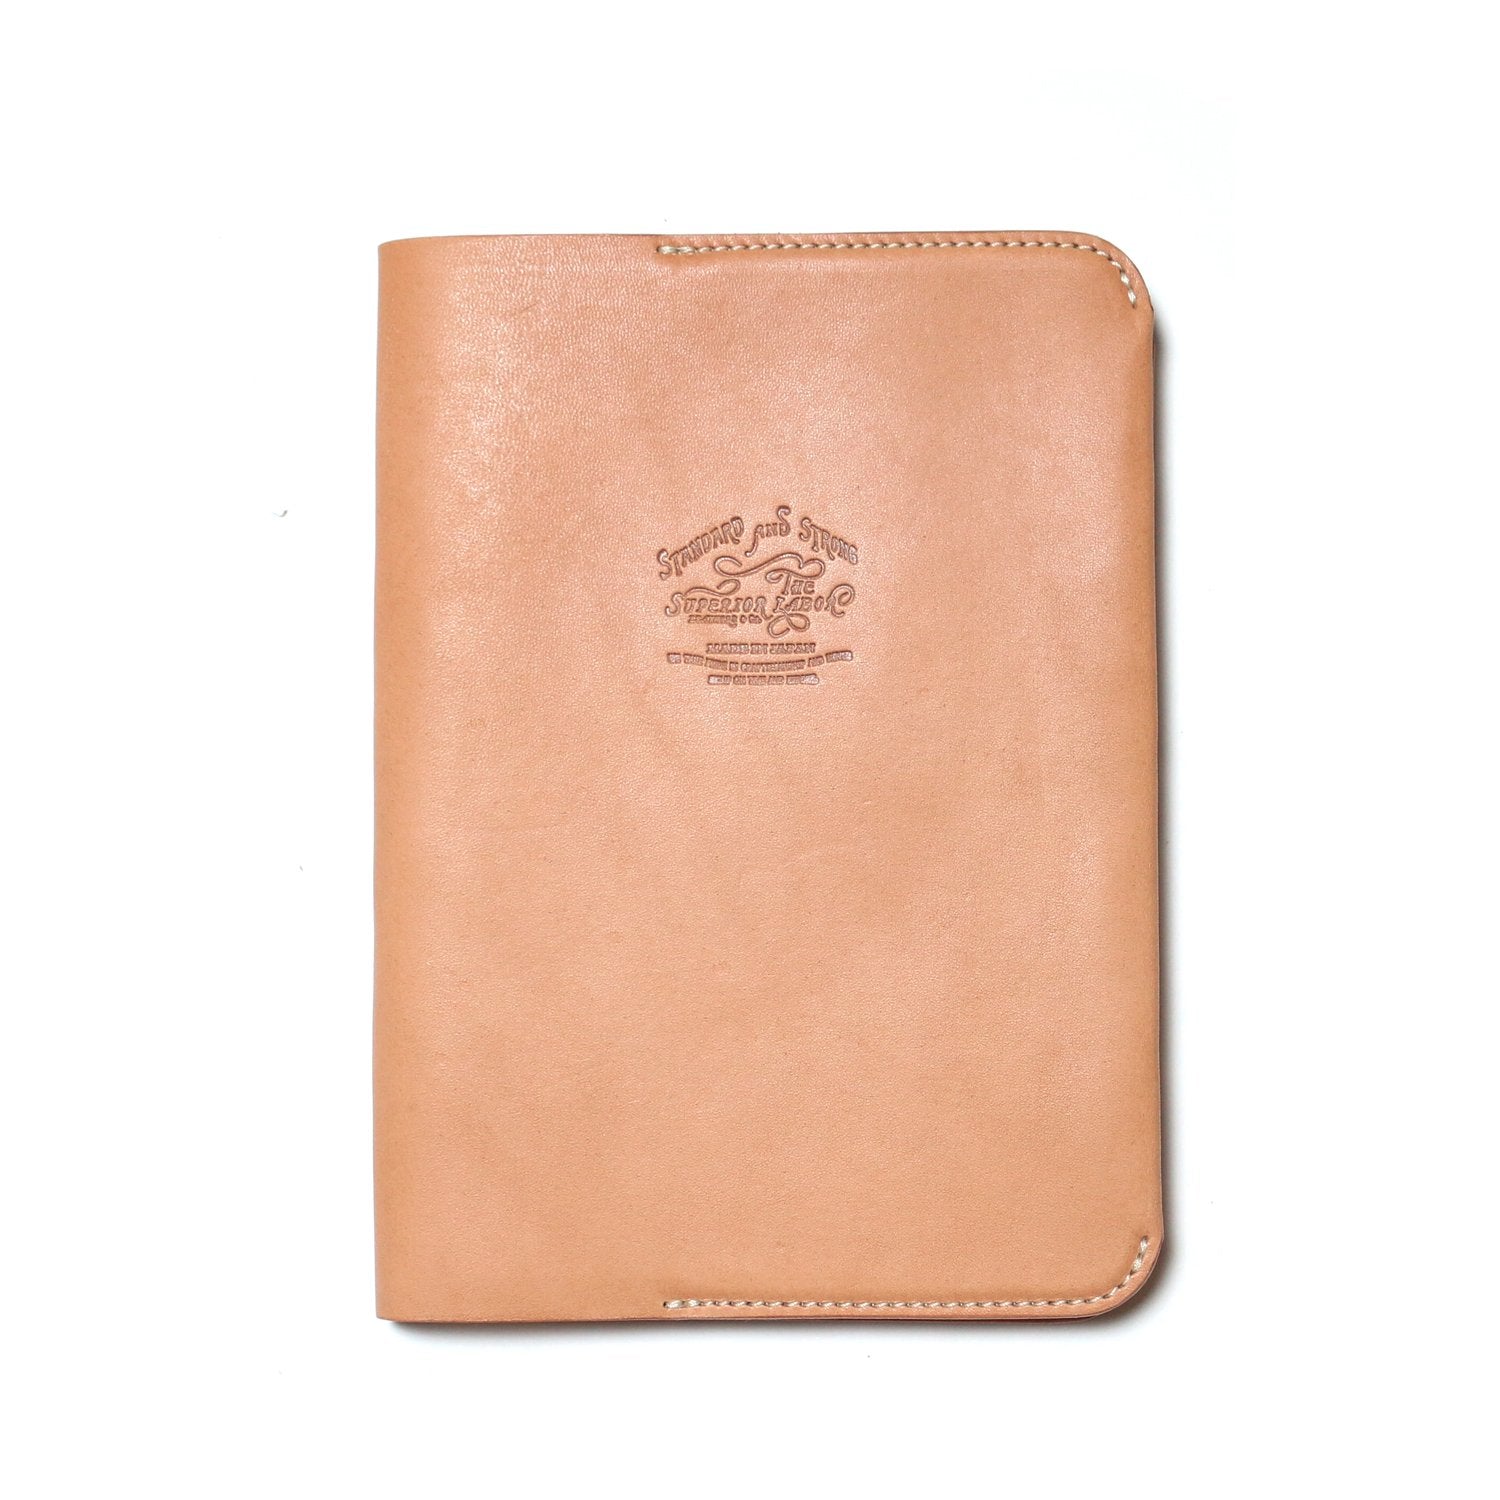 B6 leather Notebook cover – Wanderlust by T.S.L